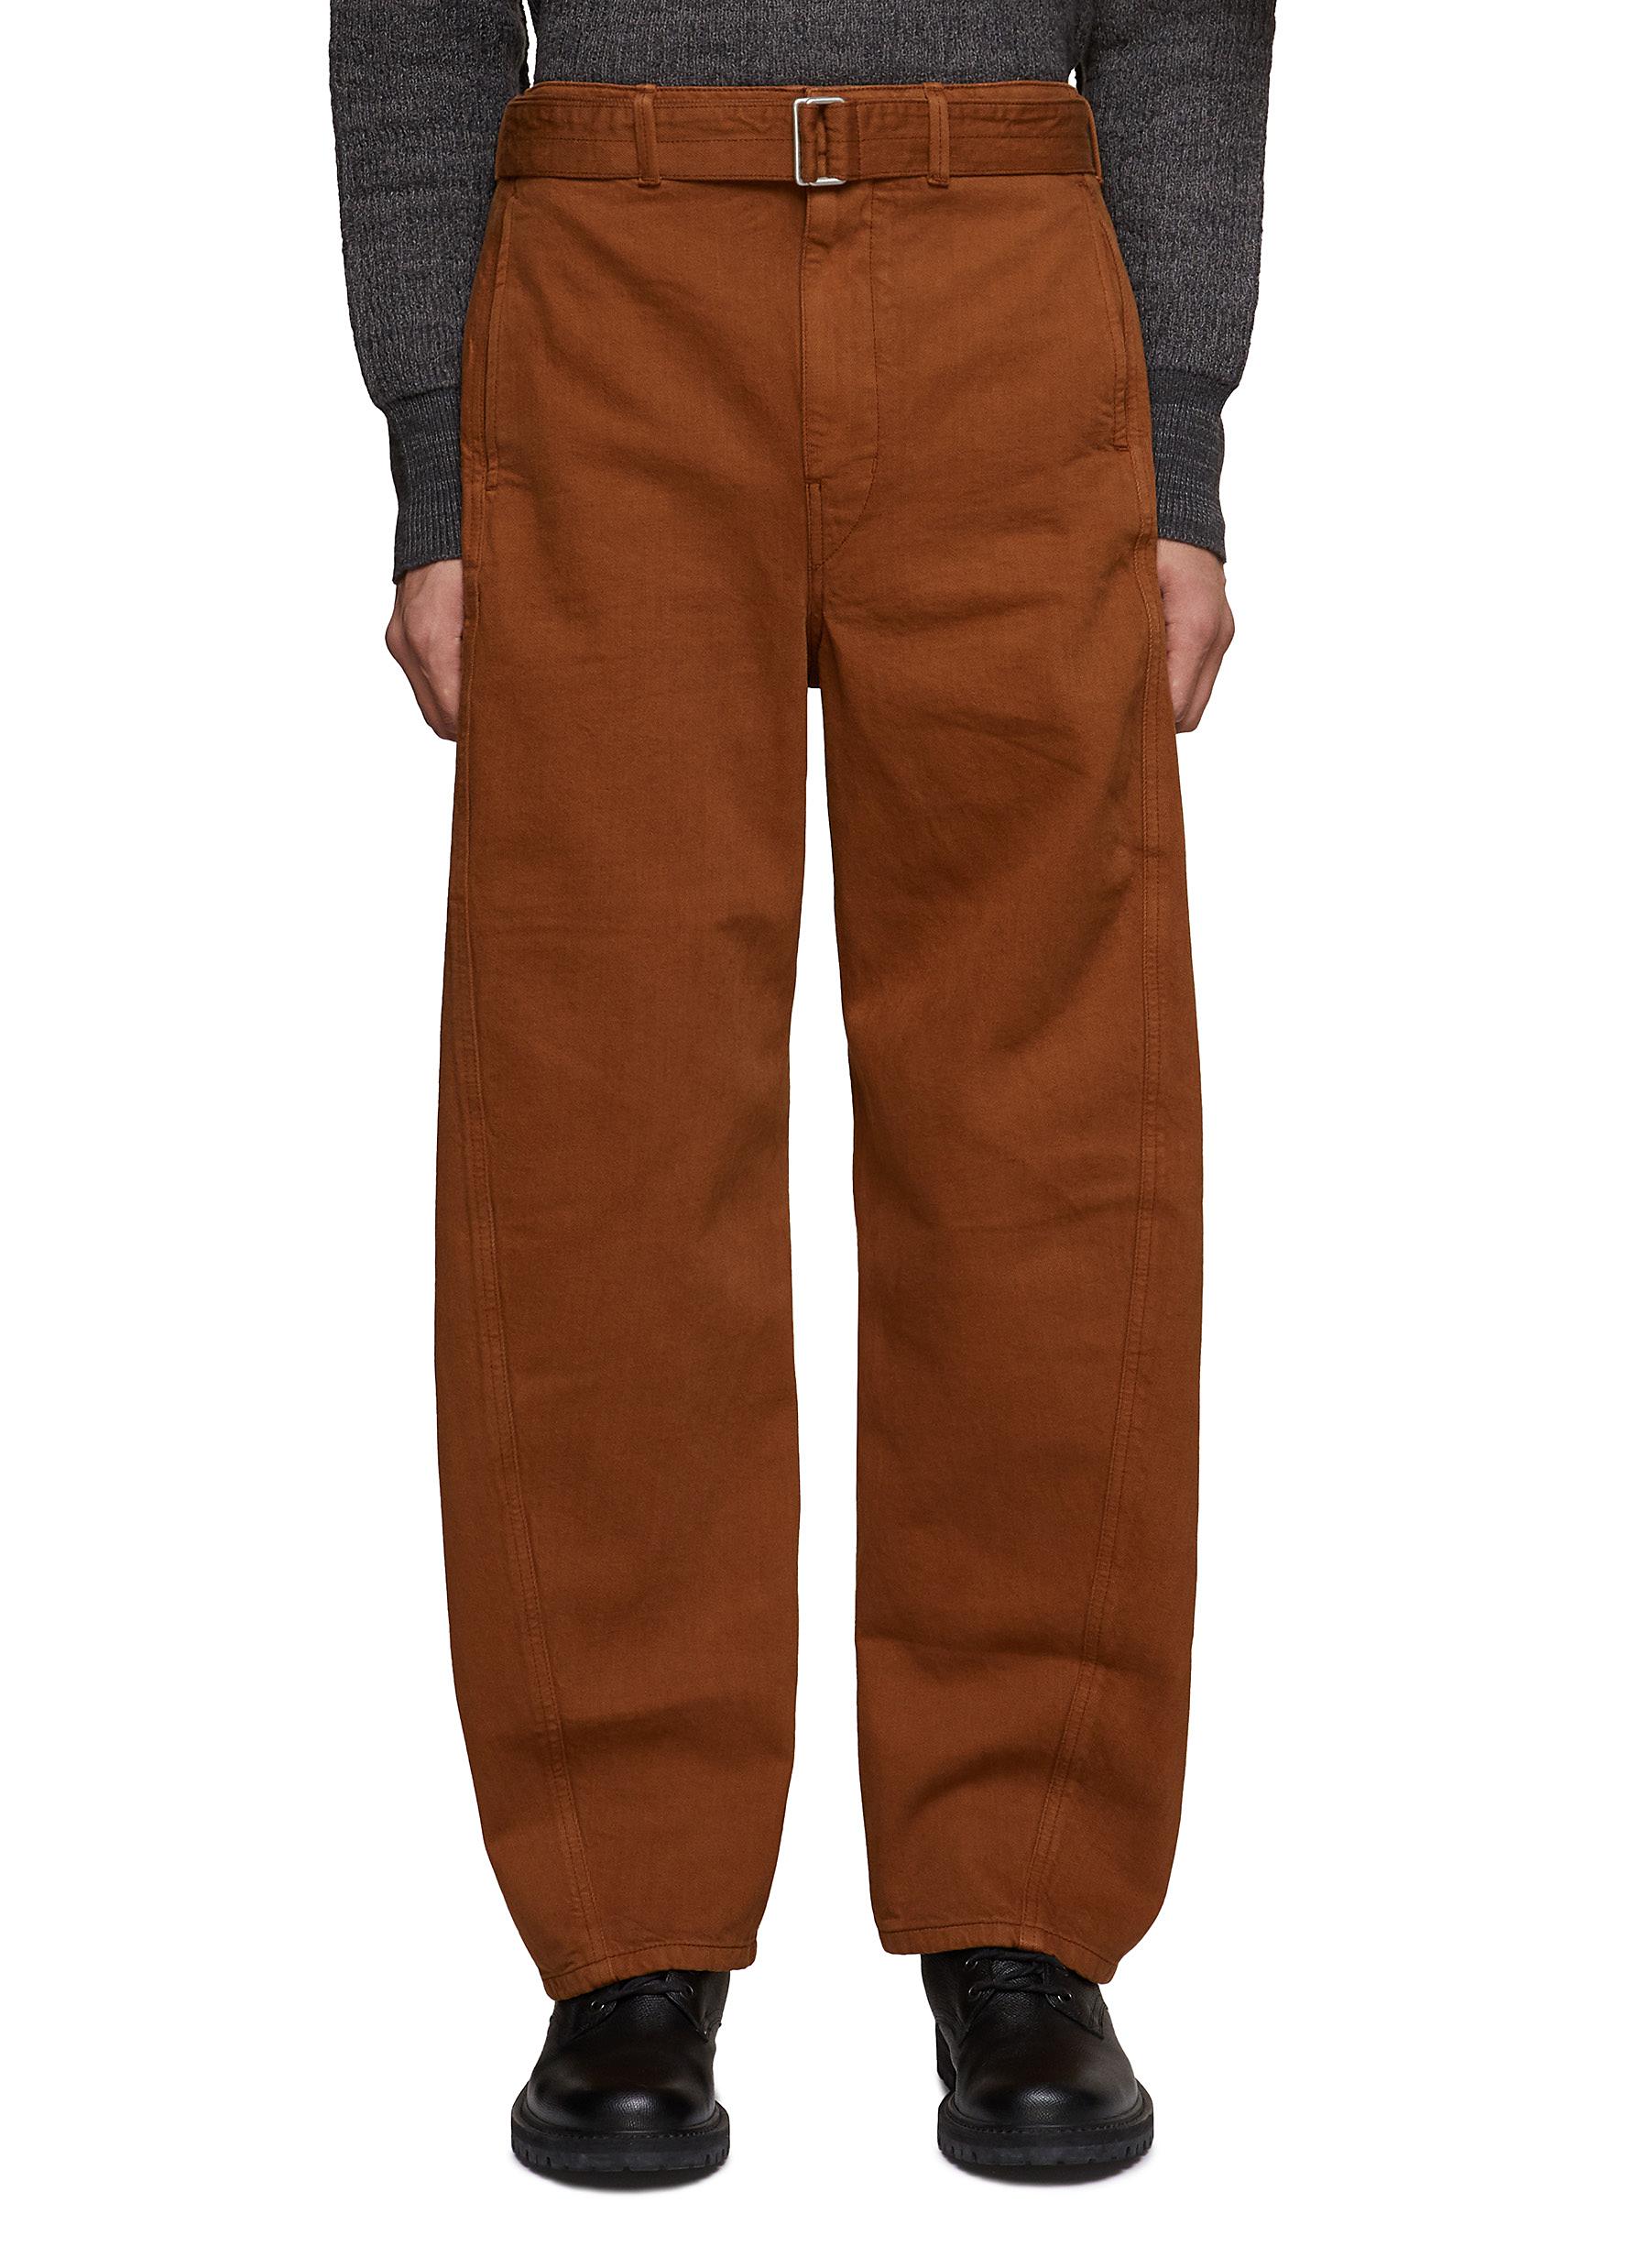 LEMAIRE HEAVY TWISTED BELTED DENIM PANTS